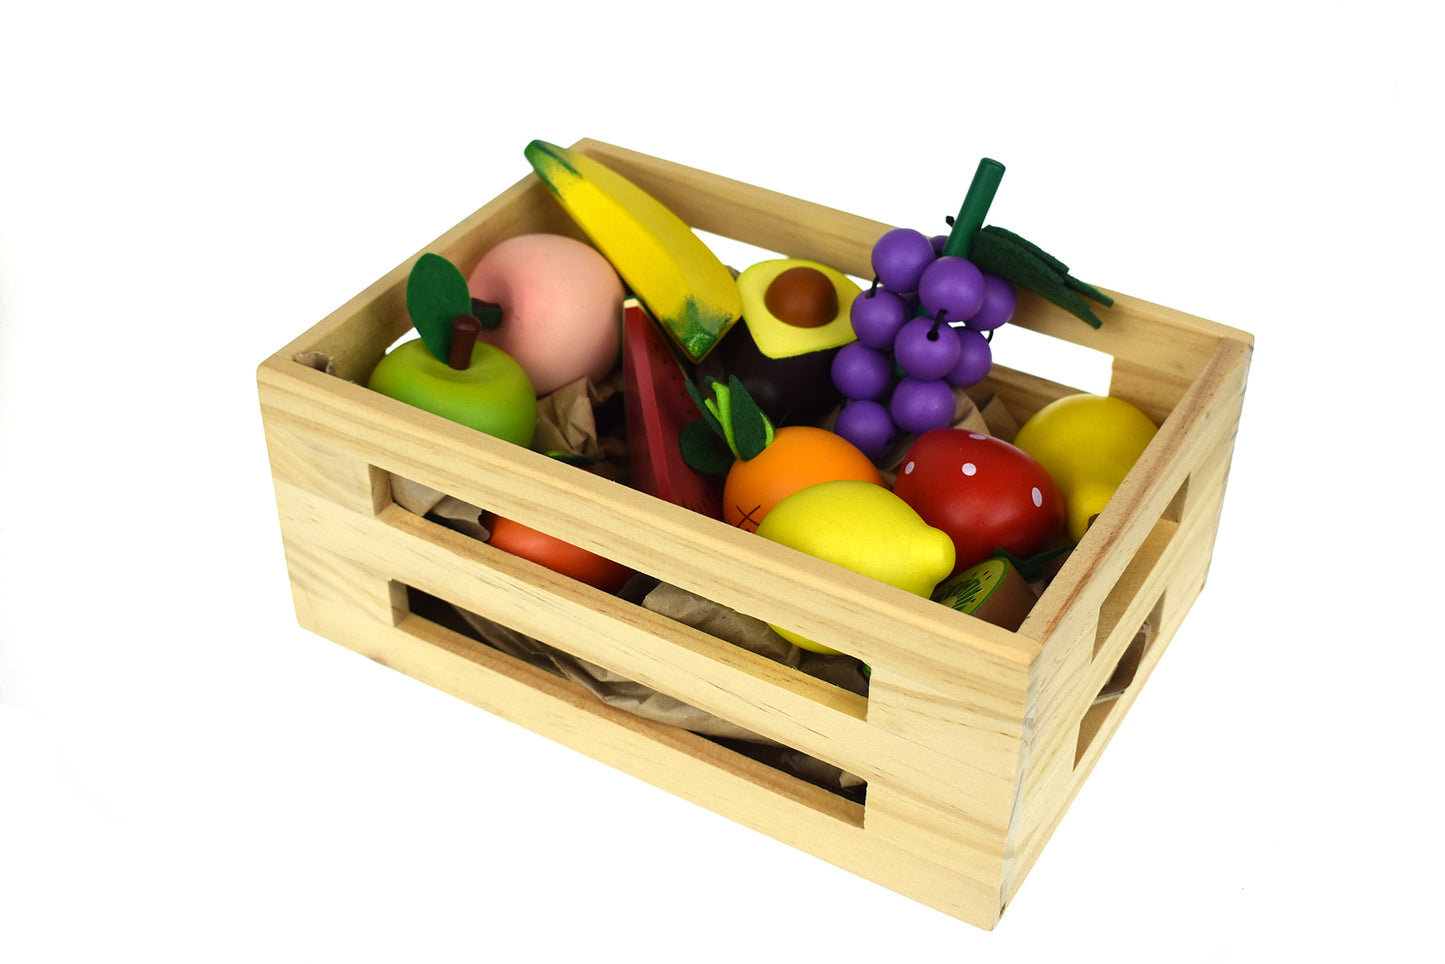 WOODEN VEGETABLES/ FRUIT 15 PCS SET WITH WOODEN CRATE